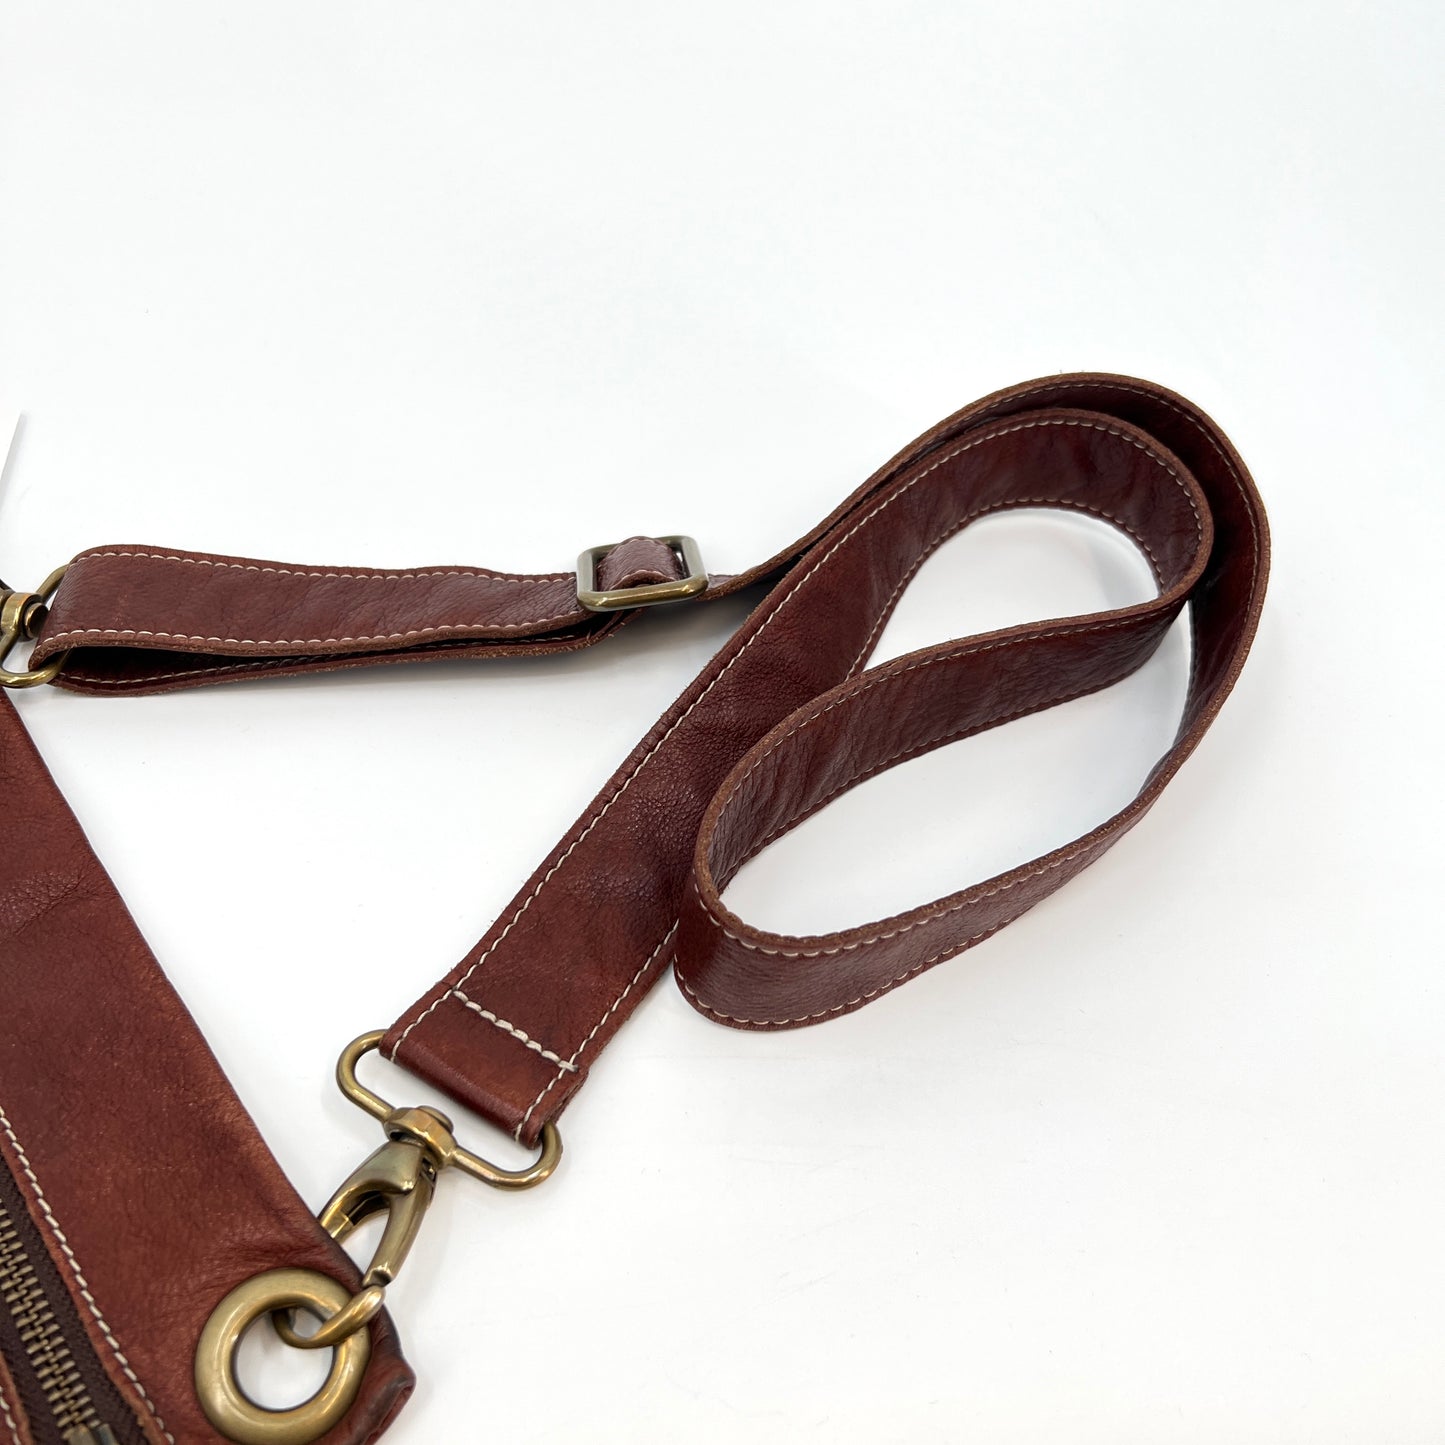 SOLD. Roots Canada Cognac Leather Bag